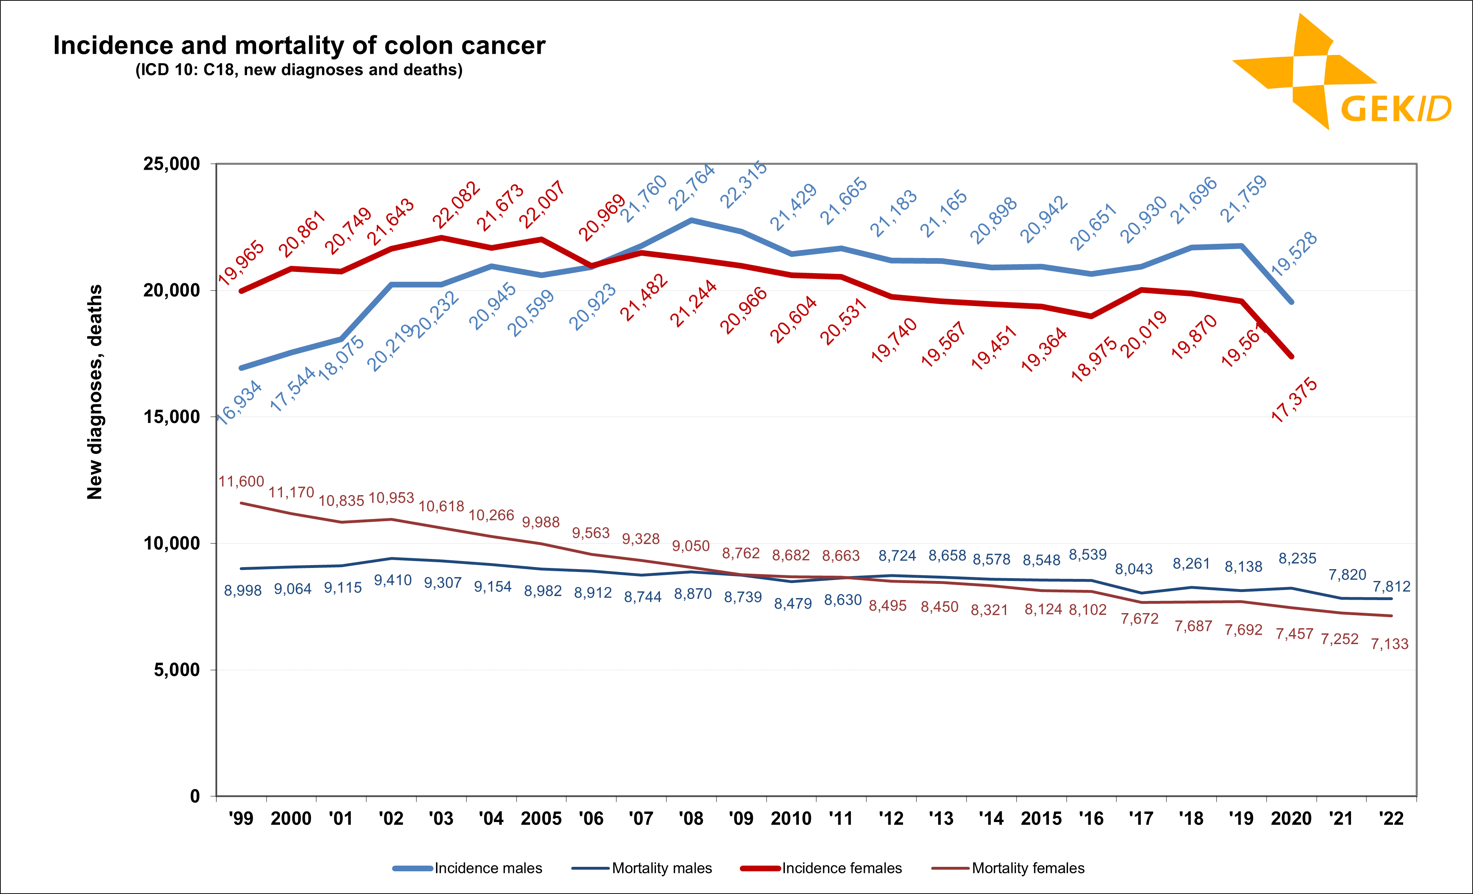 Estimated incidence and mortality of colon cancer (ICD 10: C18) in Germany - case numbers